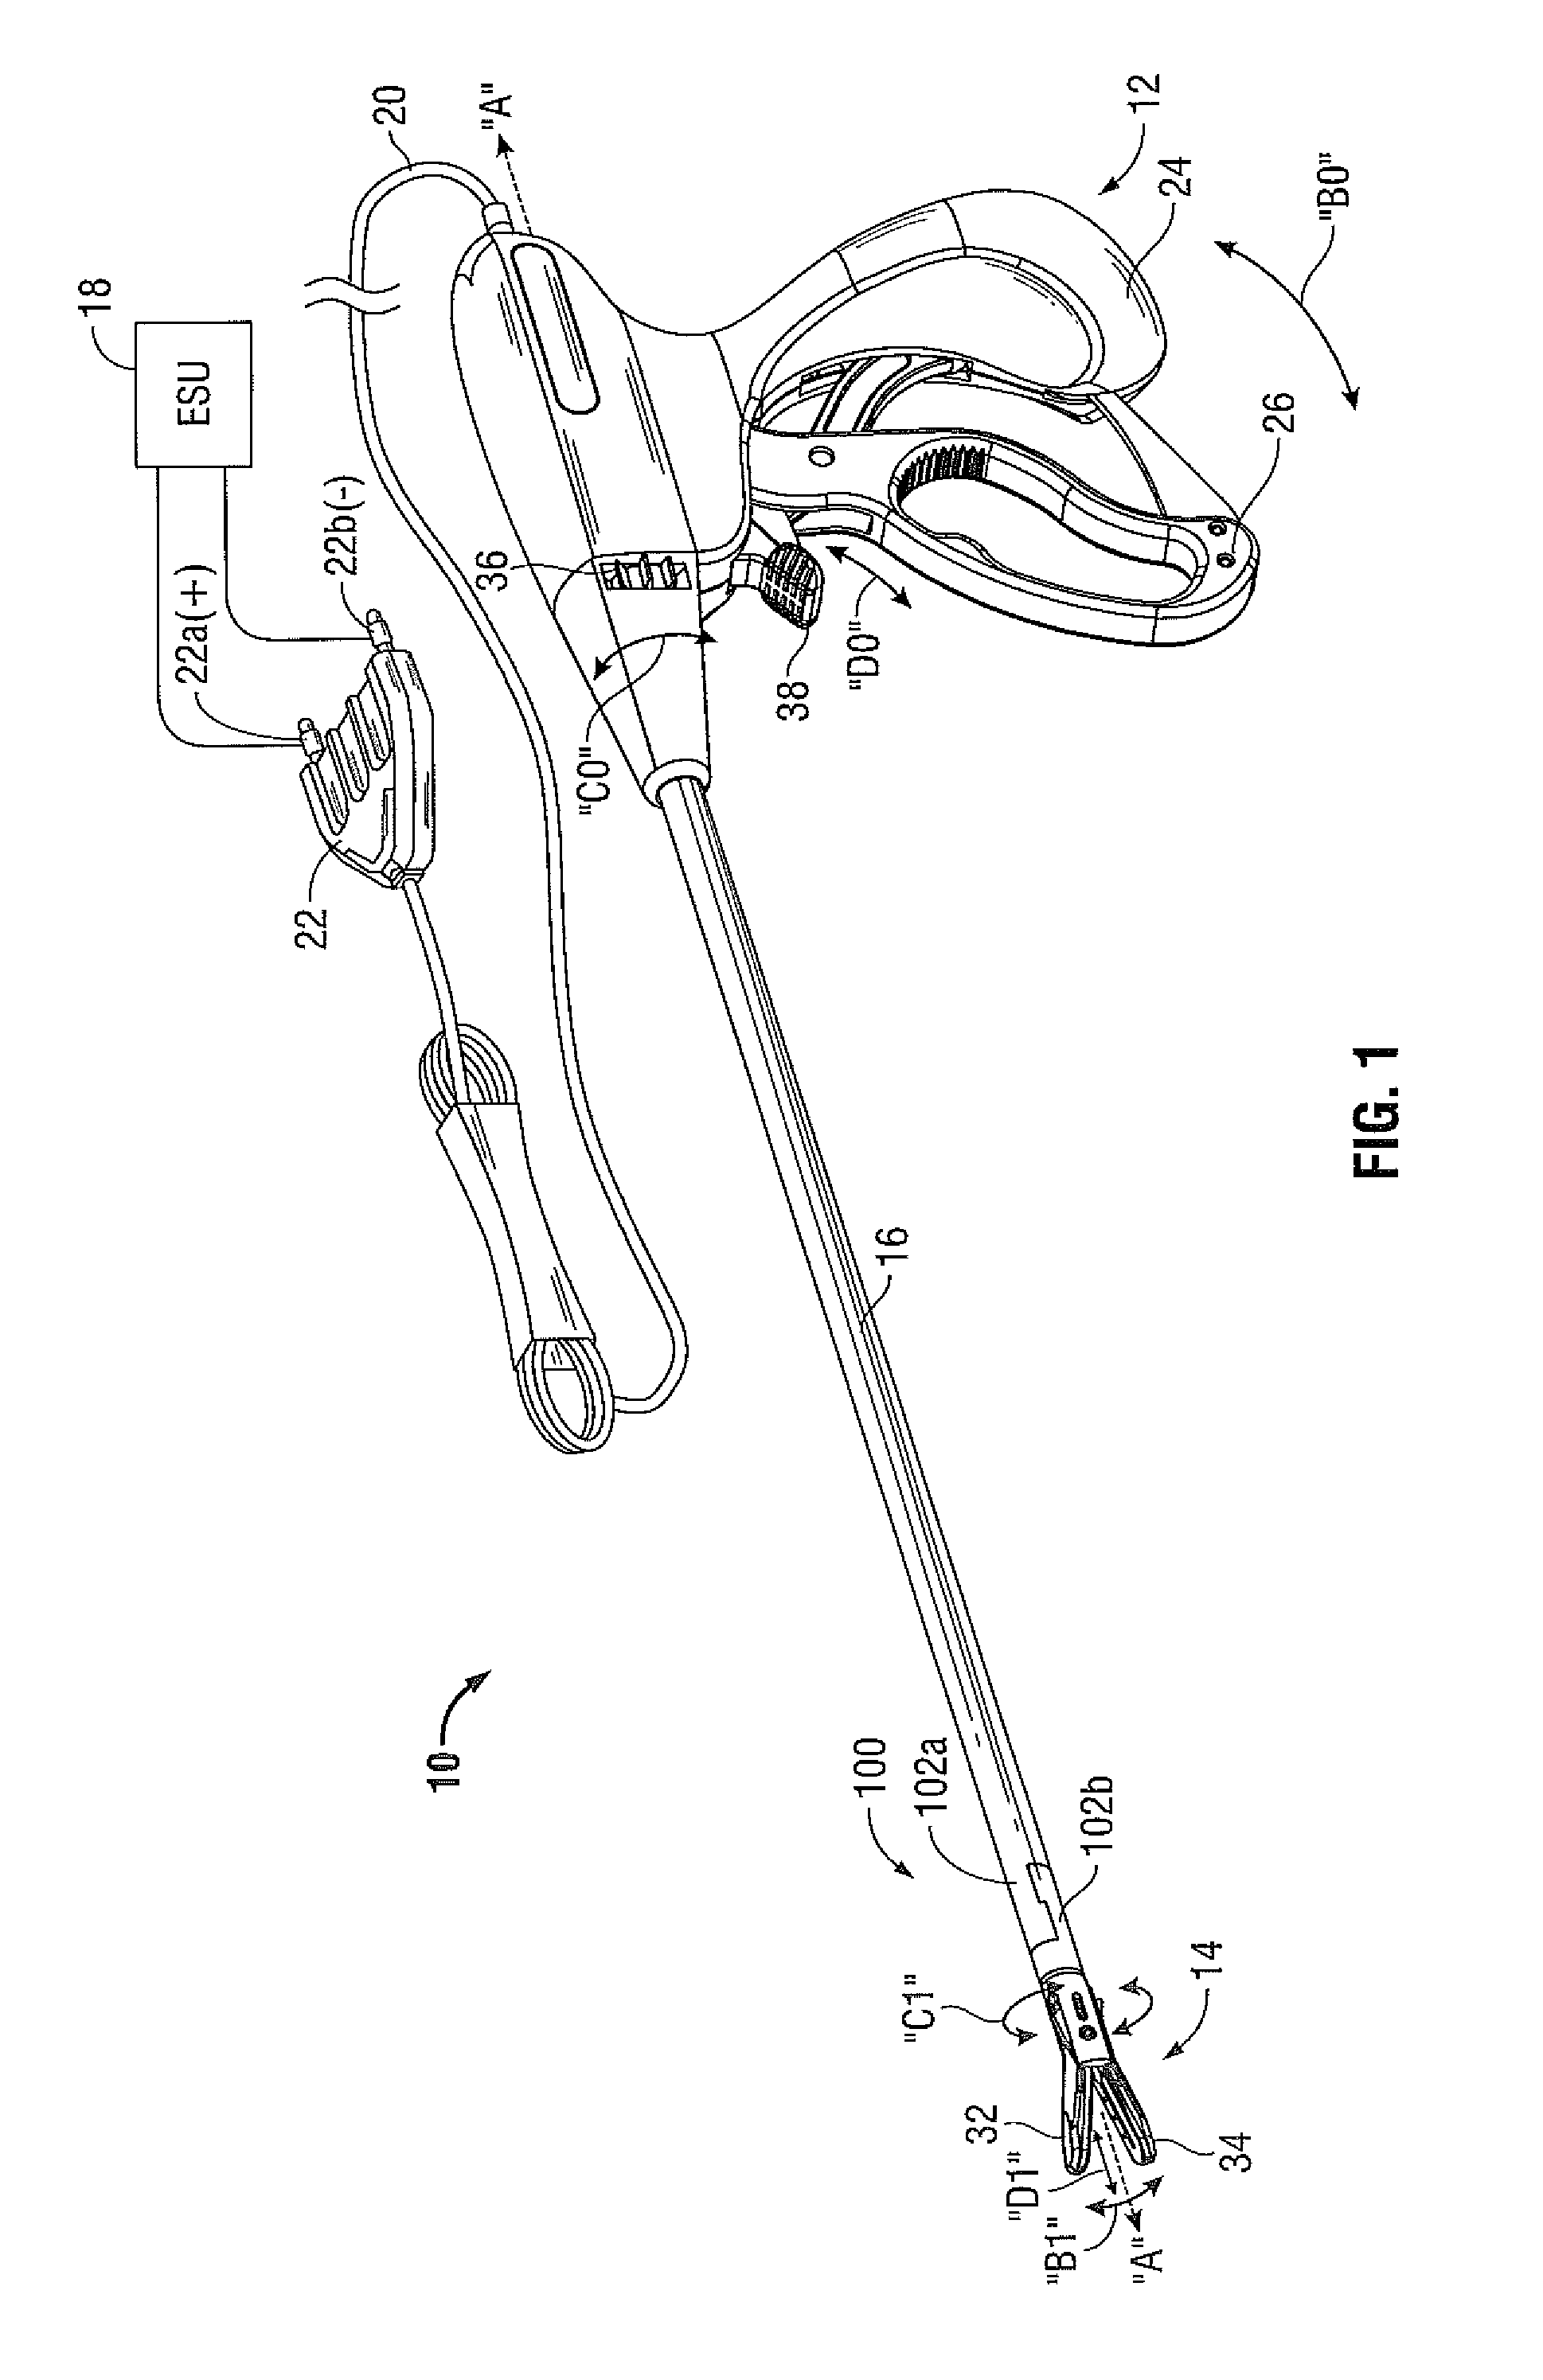 Surgical Instrument with a Separable Coaxial Joint